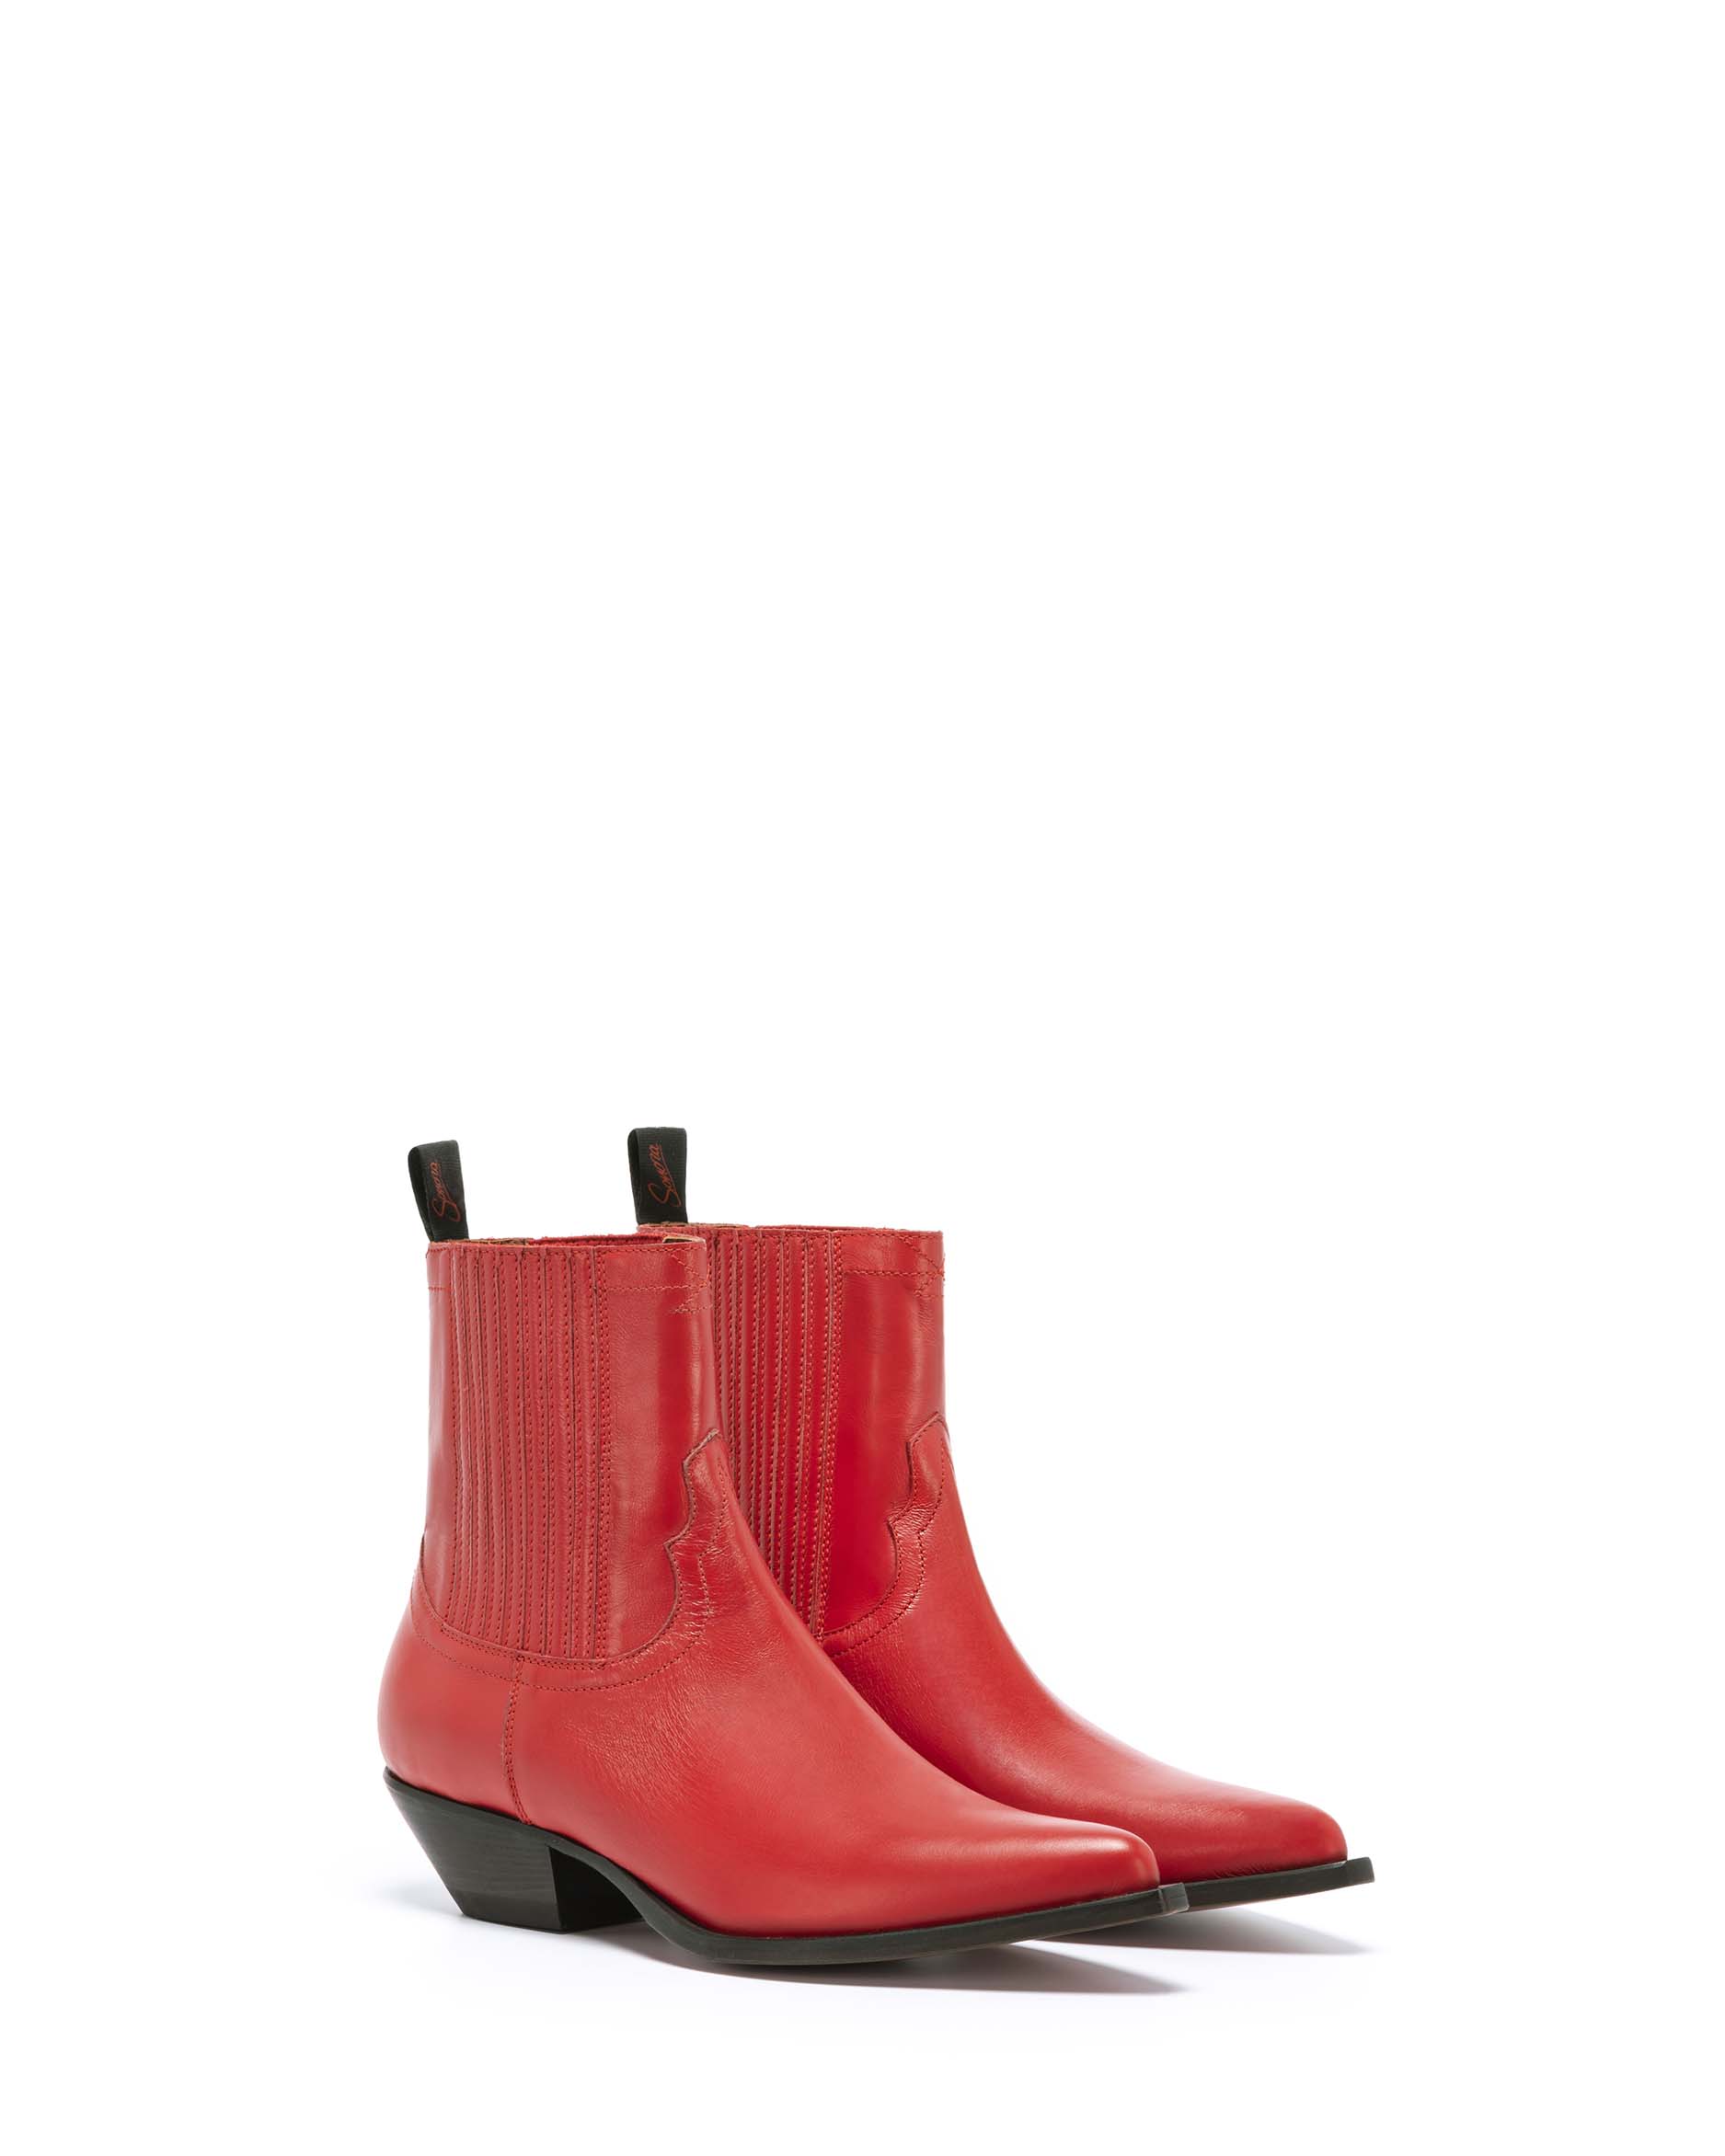 HIDALGO Women's Ankle Boots in Red Calfskin_Front_01